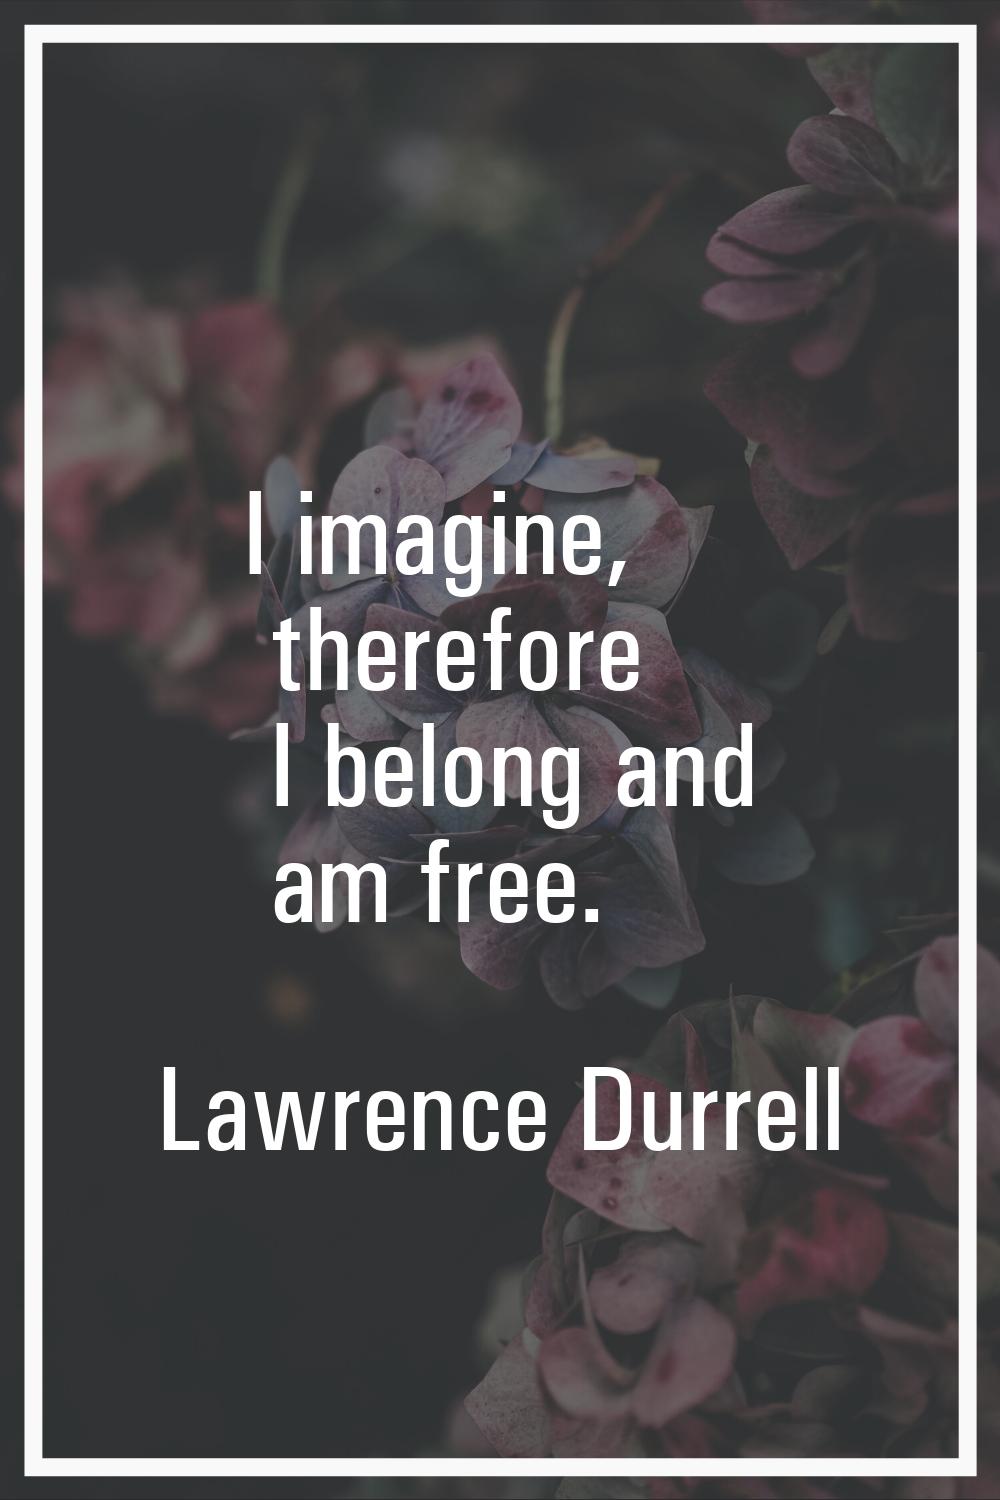 I imagine, therefore I belong and am free.